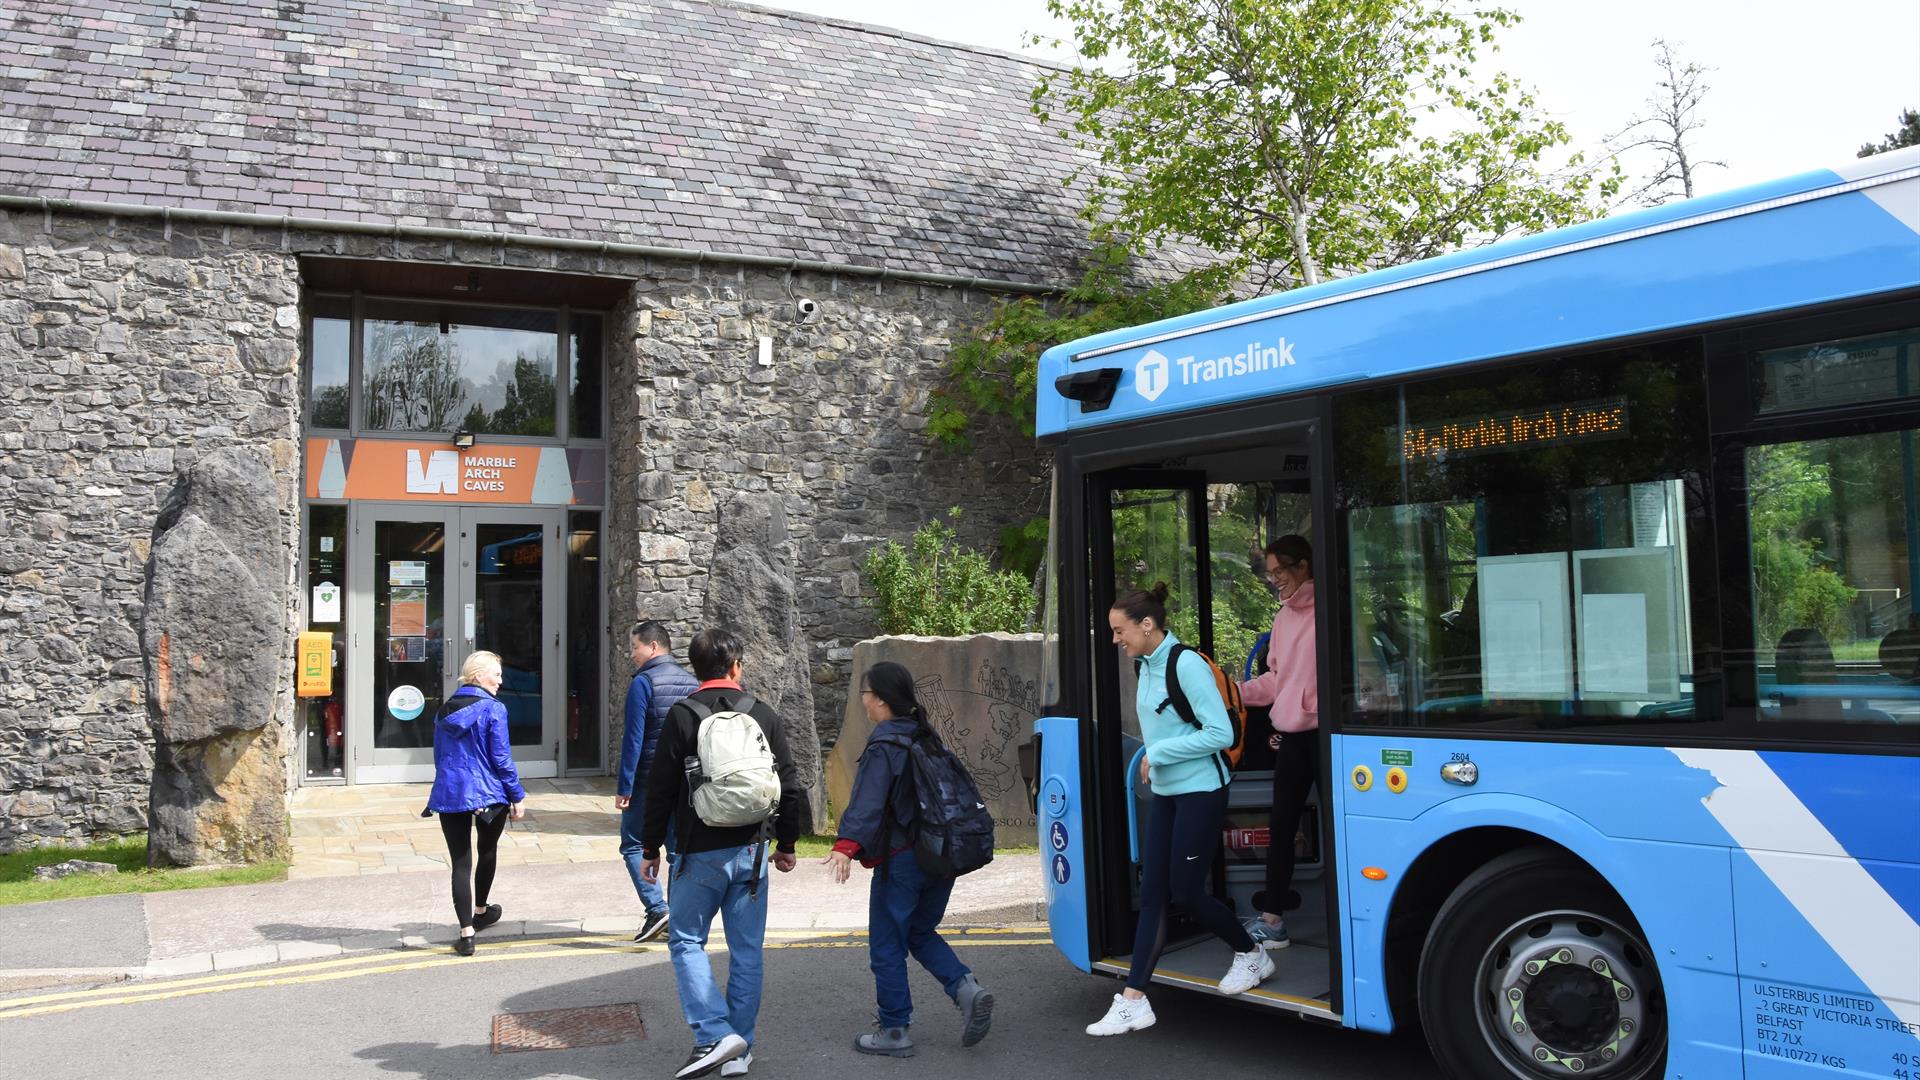 Summer Bus Service to the Marble Arch Caves